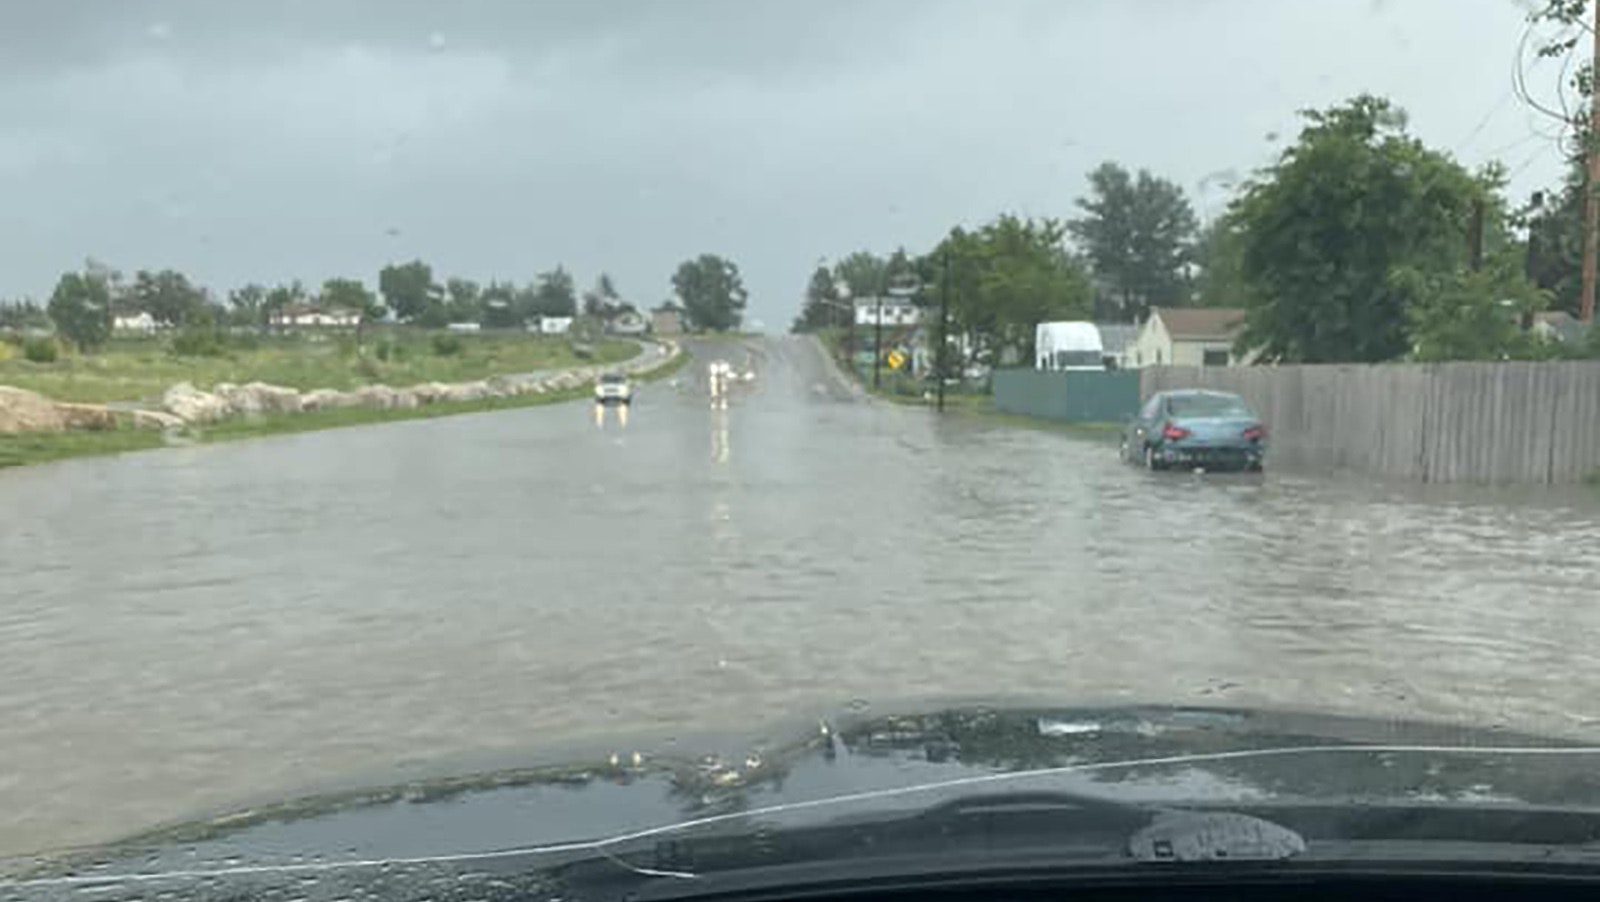 Flooding at 13th and Pine in Casper, courtesy Paul Malsom via National Weather Service Facebook.